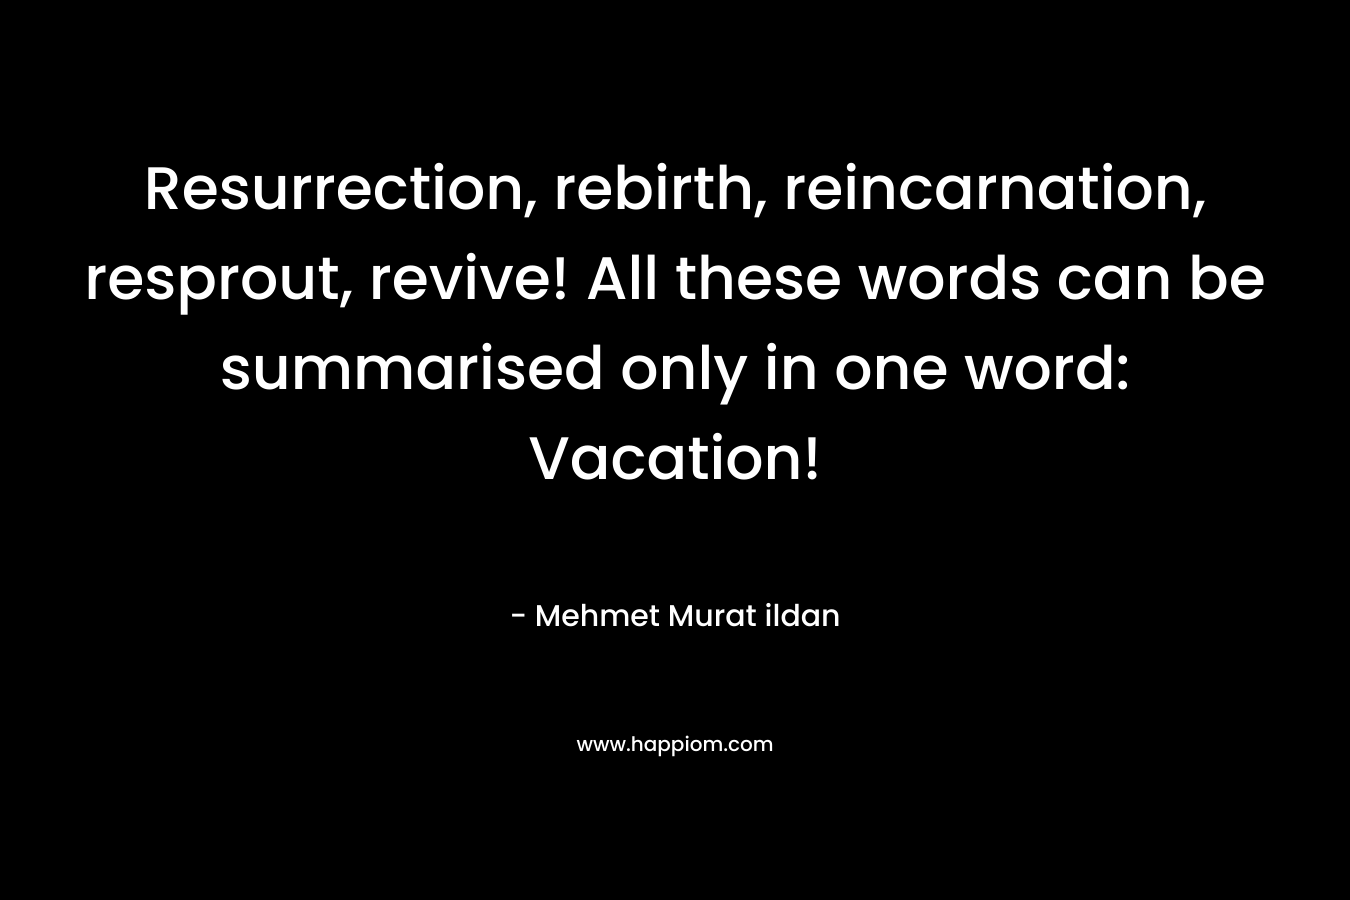 Resurrection, rebirth, reincarnation, resprout, revive! All these words can be summarised only in one word: Vacation!